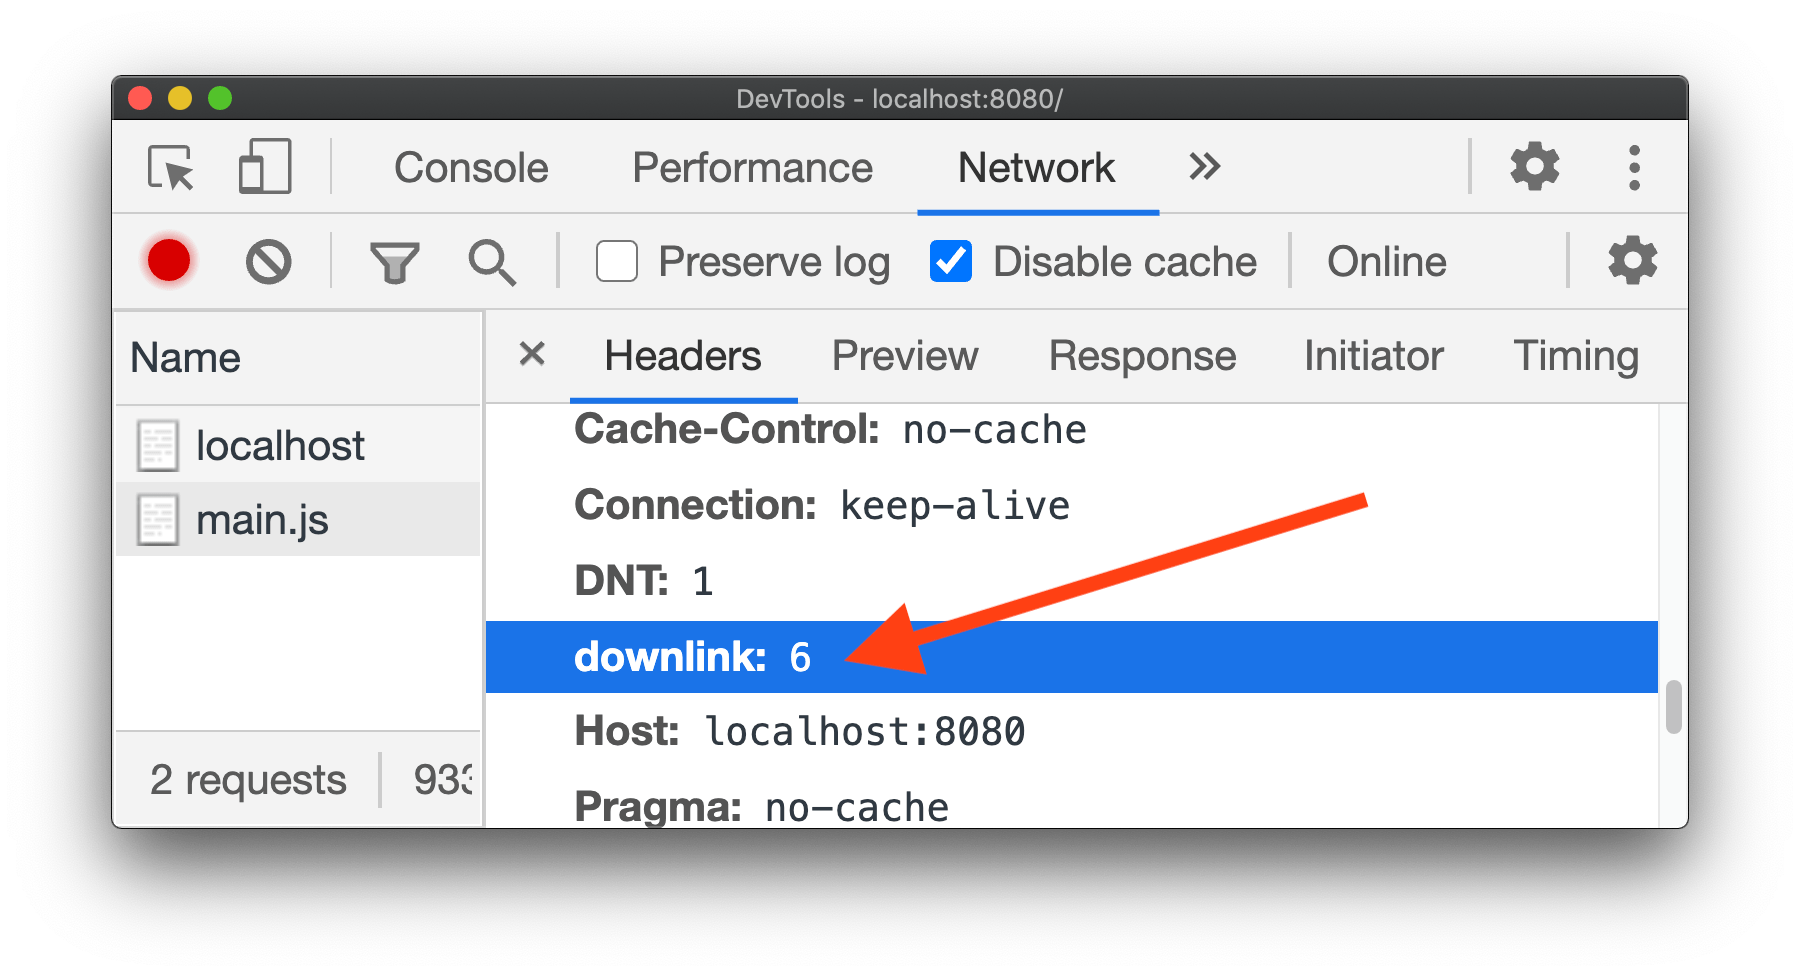 Network downlink as a request header